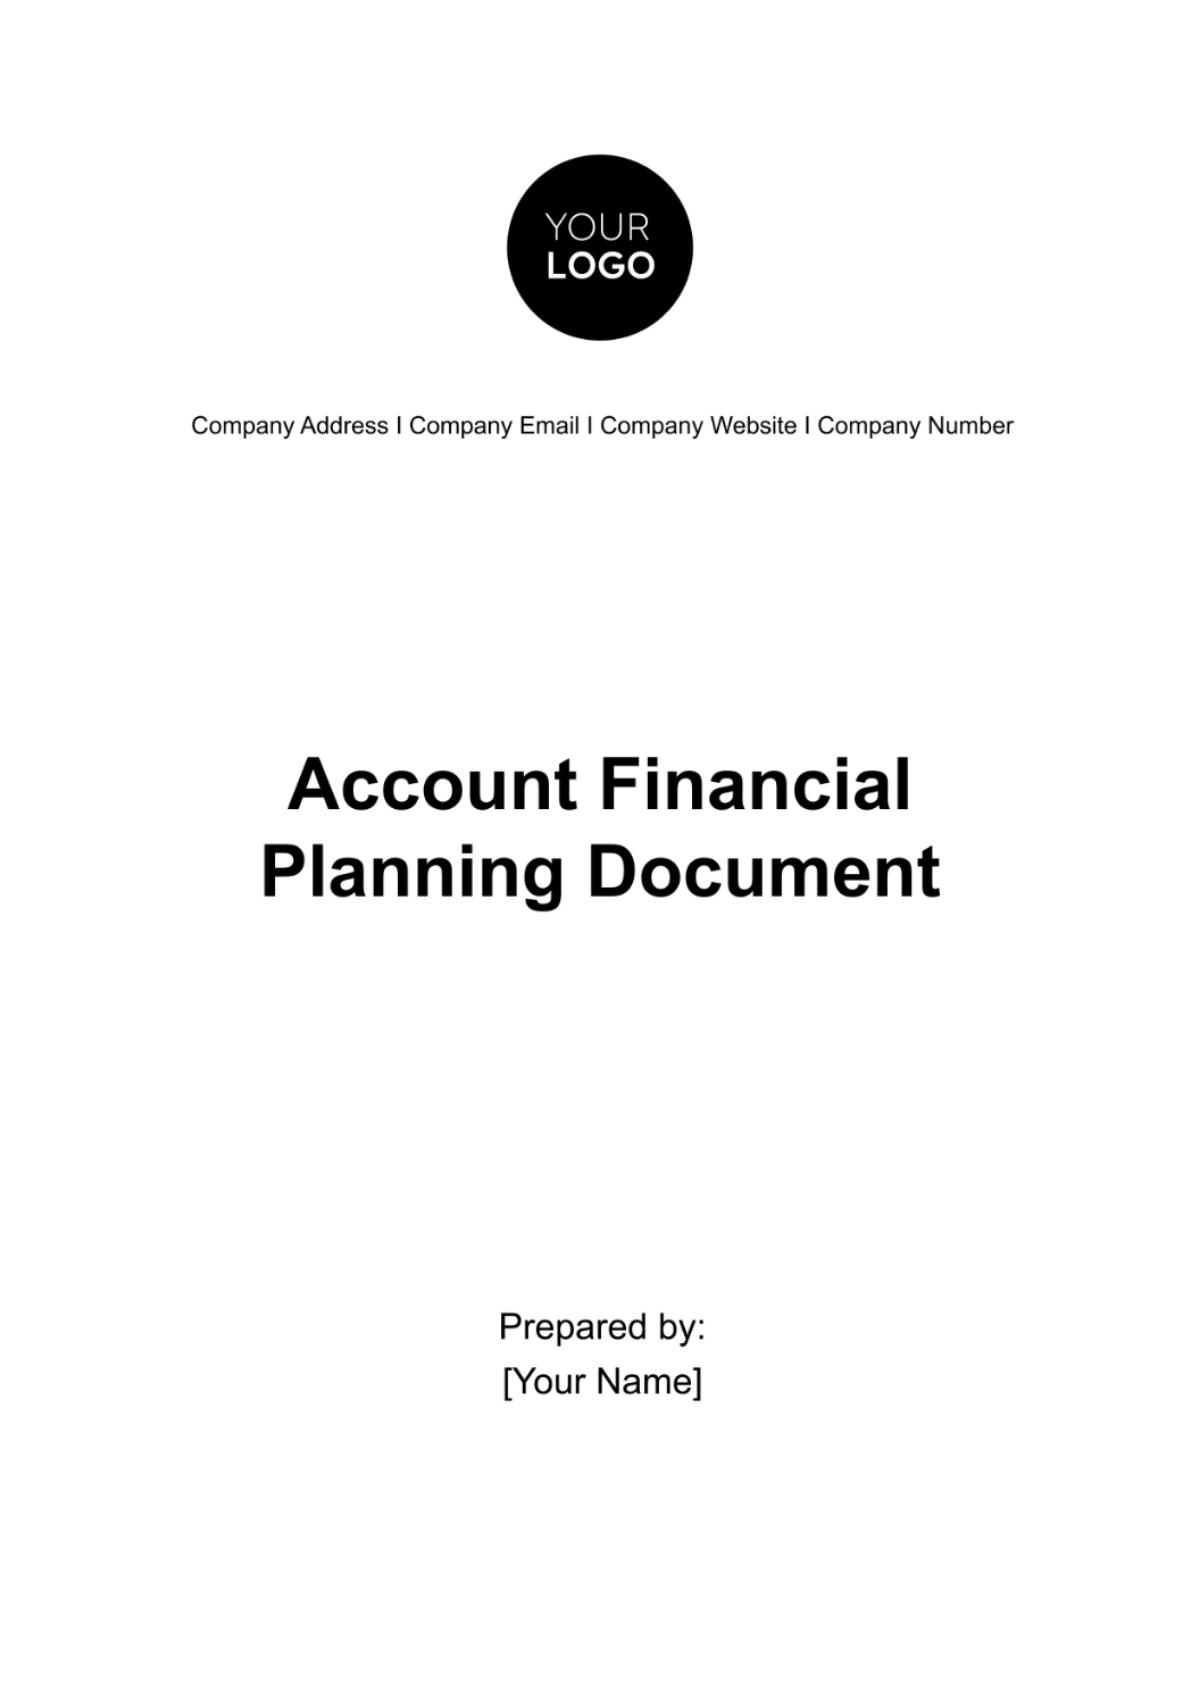 Account Financial Planning Document Template